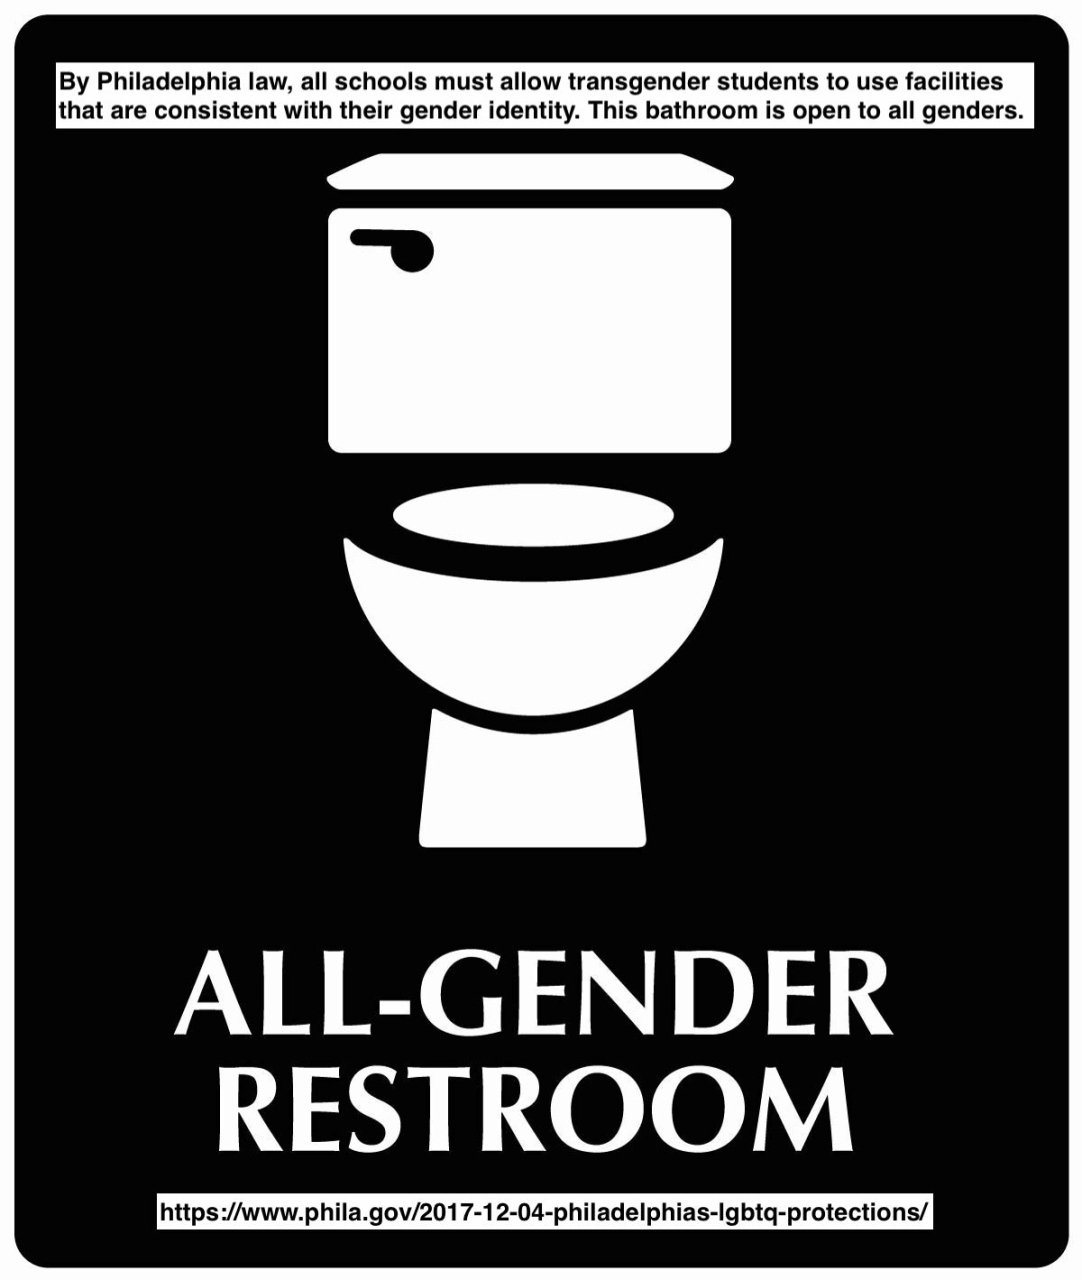 Transgender bathroom access laws in the United States, 2015-2016